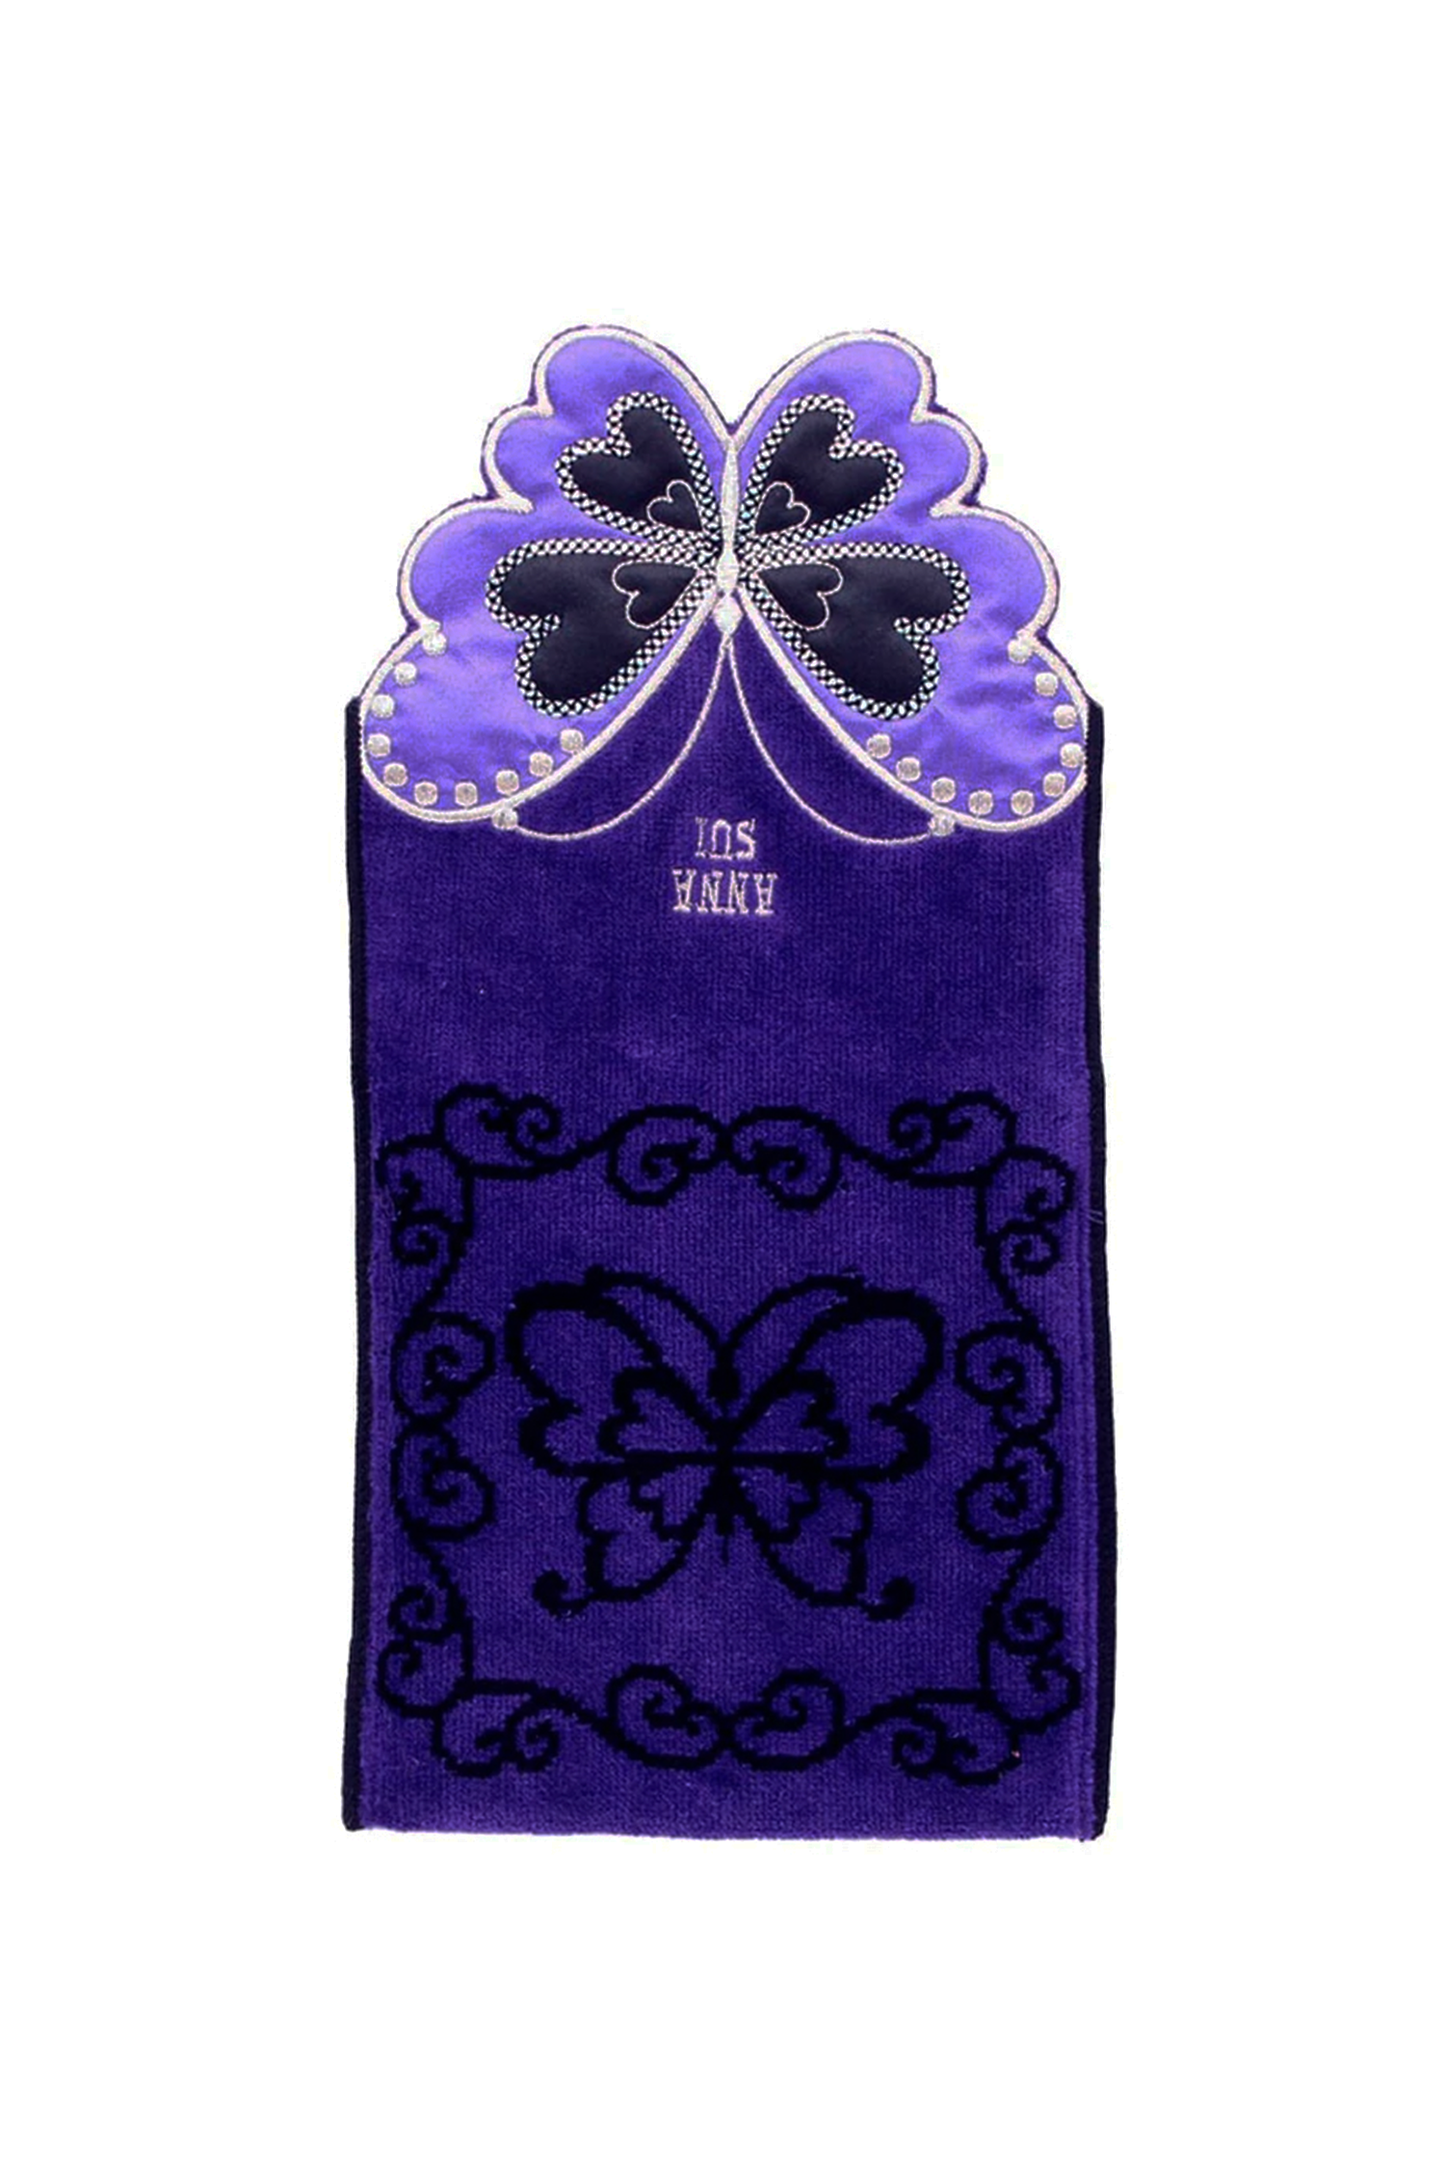 Open Purple Pocket Washcloth, cut-out butterfly, Anna Sui gold label above, black retro butterfly 